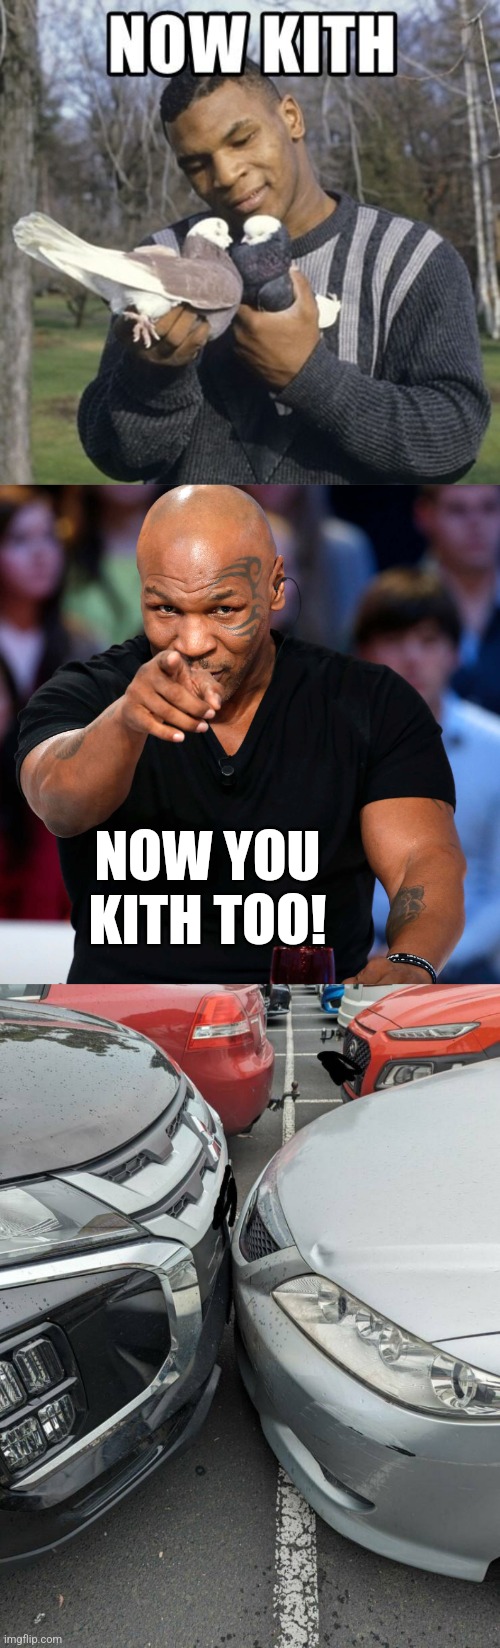 Kith | NOW YOU KITH TOO! | image tagged in kith | made w/ Imgflip meme maker